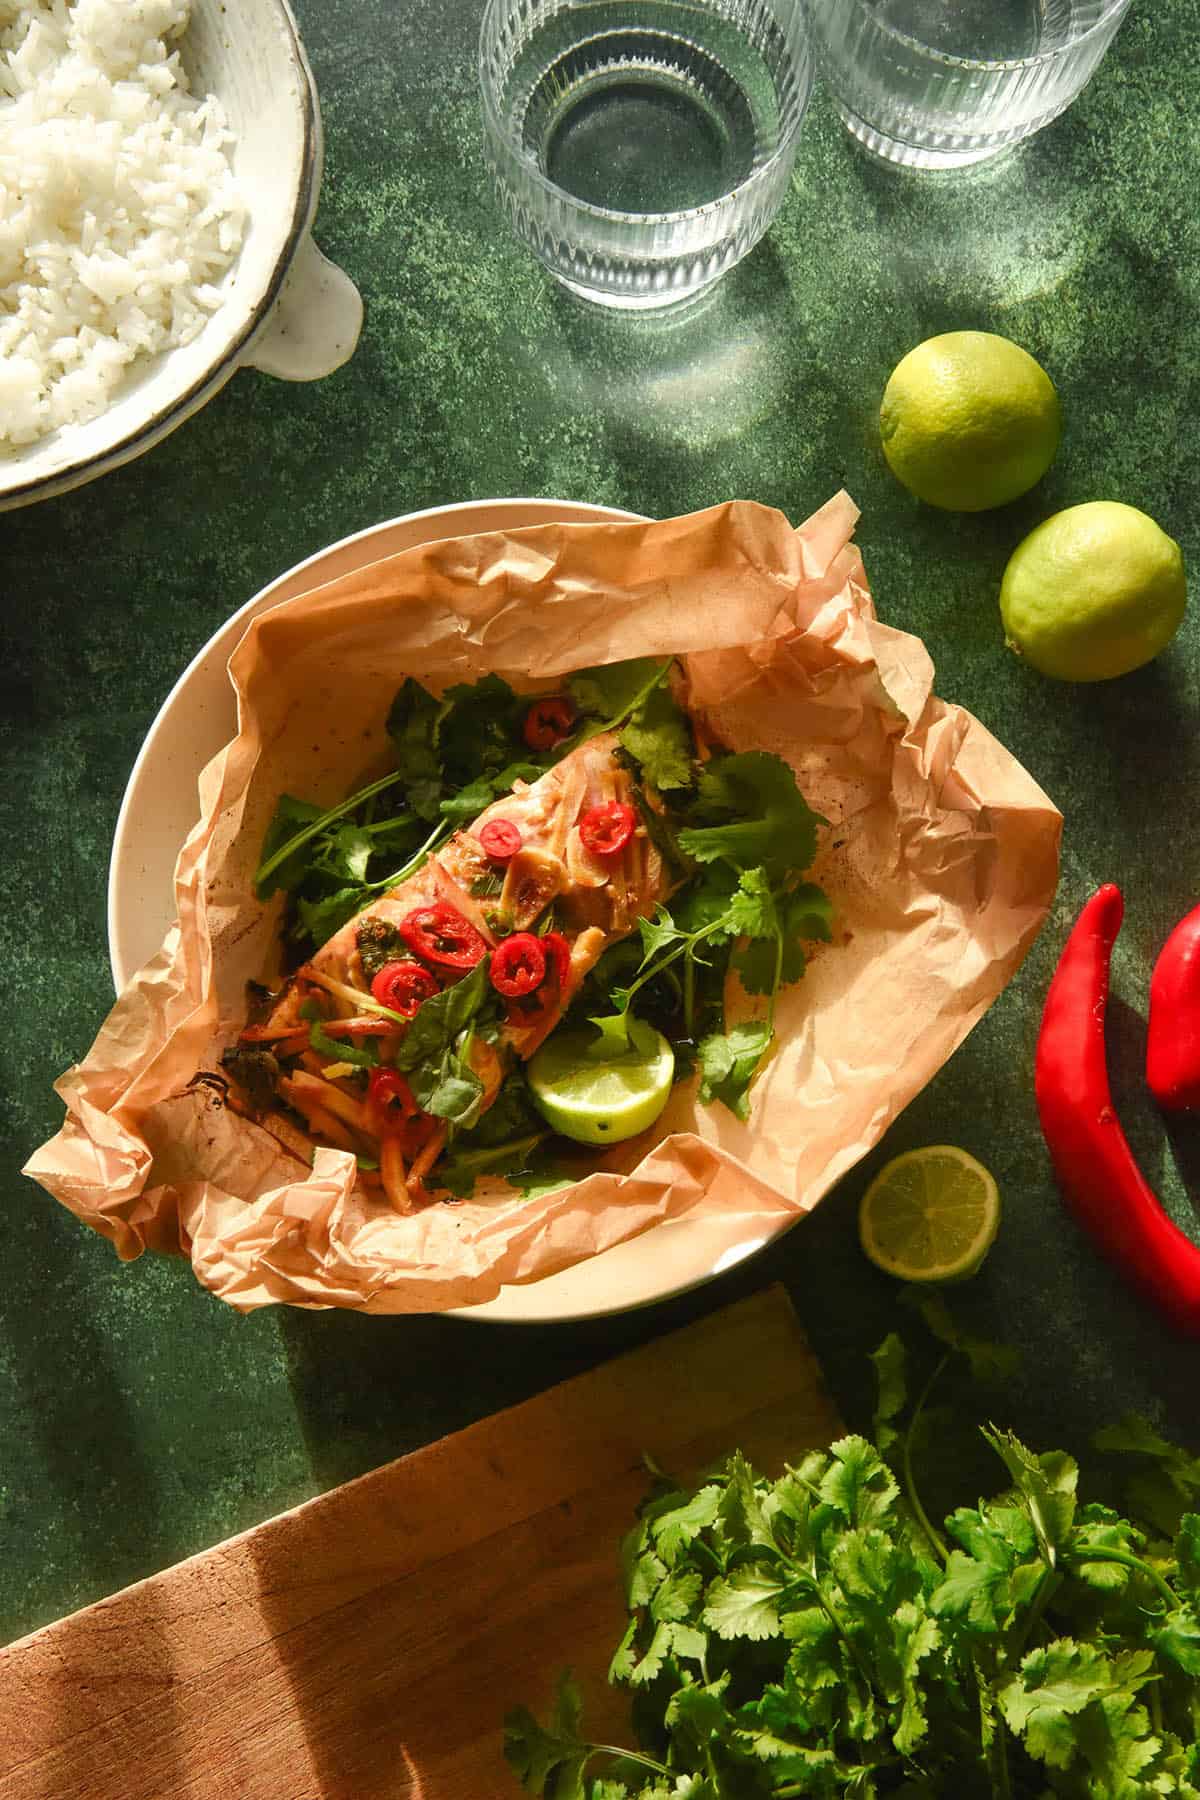 An aerial image of a piece of fish baked in a baking paper parcel with Asian inspired flavours. The fish sits in the centre of the image and is surrounded by ingredients used to flavour the dish, glasses of water and white rice for serving